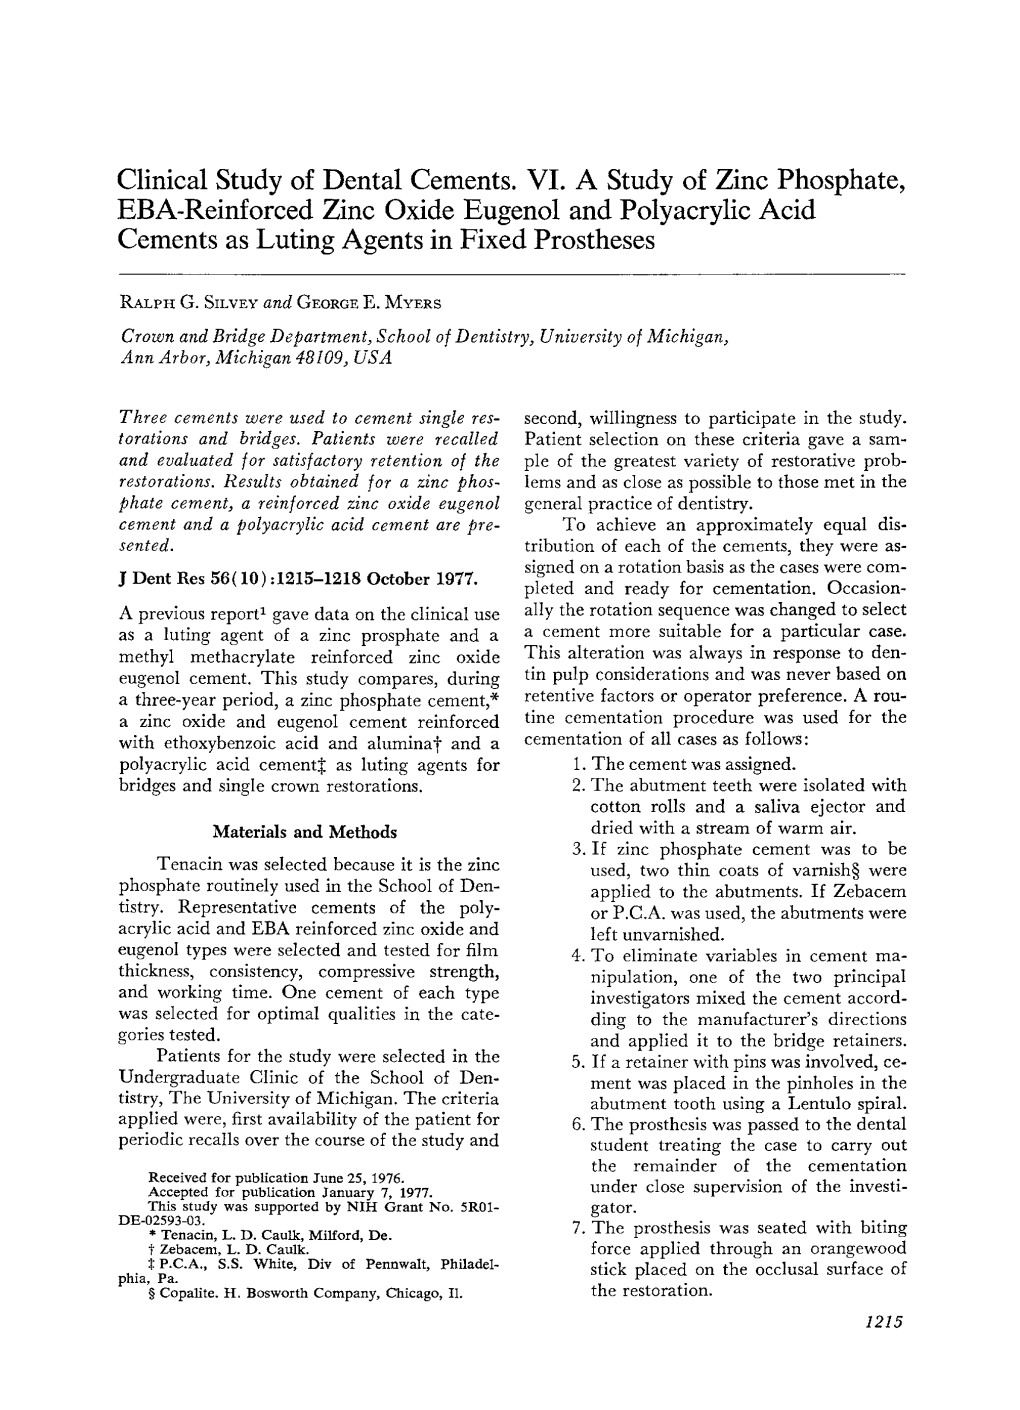 Clinical Study of Dental Cements. VI. a Study of Zinc Phosphate, EBA-Reinforced Zinc Oxide Eugenol and Polyacrylic Acid Cements As Luting Agents in Fixed Prostheses